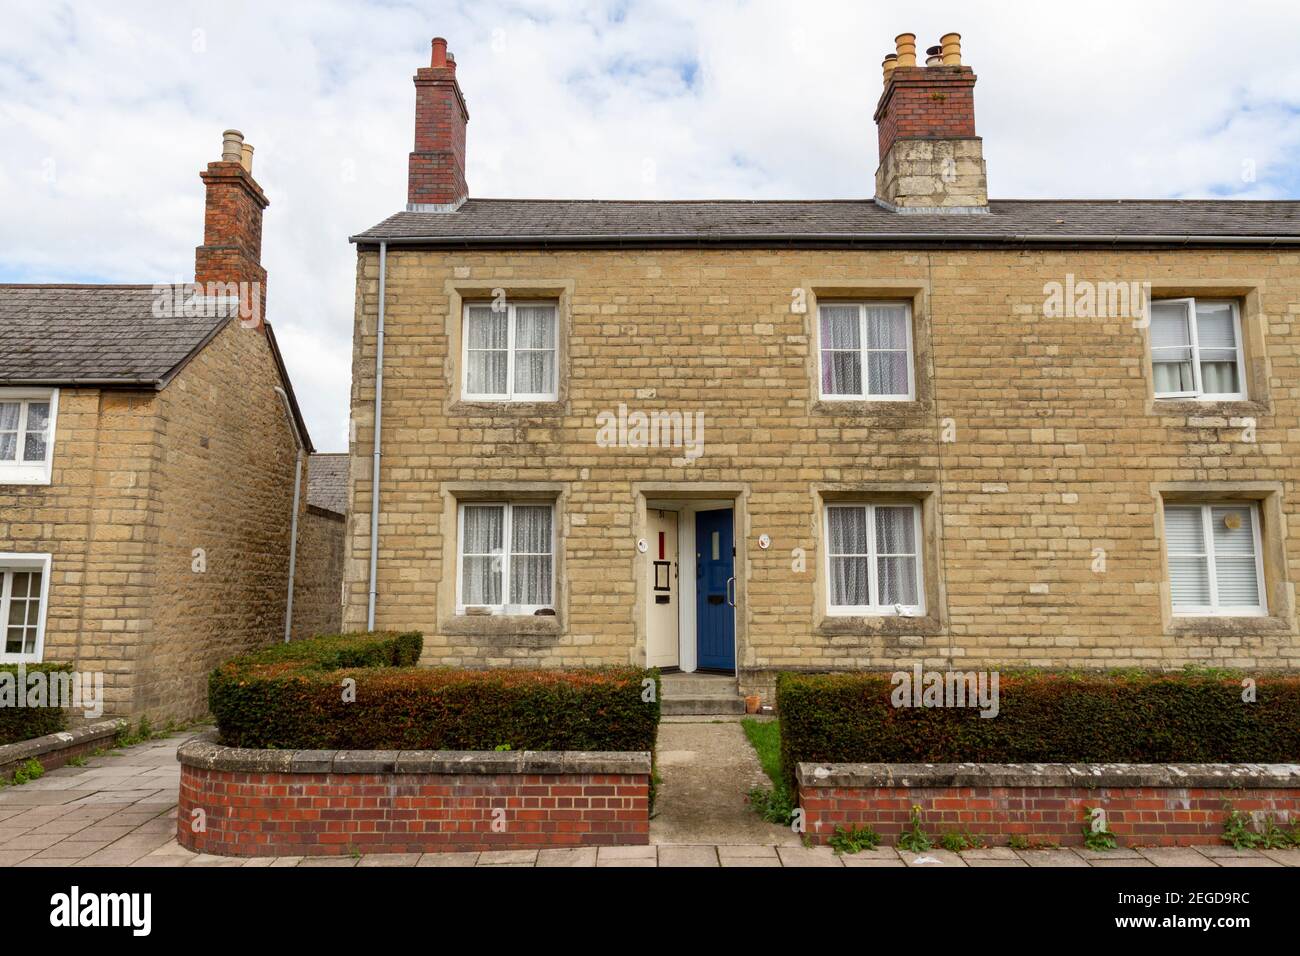 Direct view of a pair of cottages in the Railway Village, Swindon, Wiltshire, UK. Stock Photo